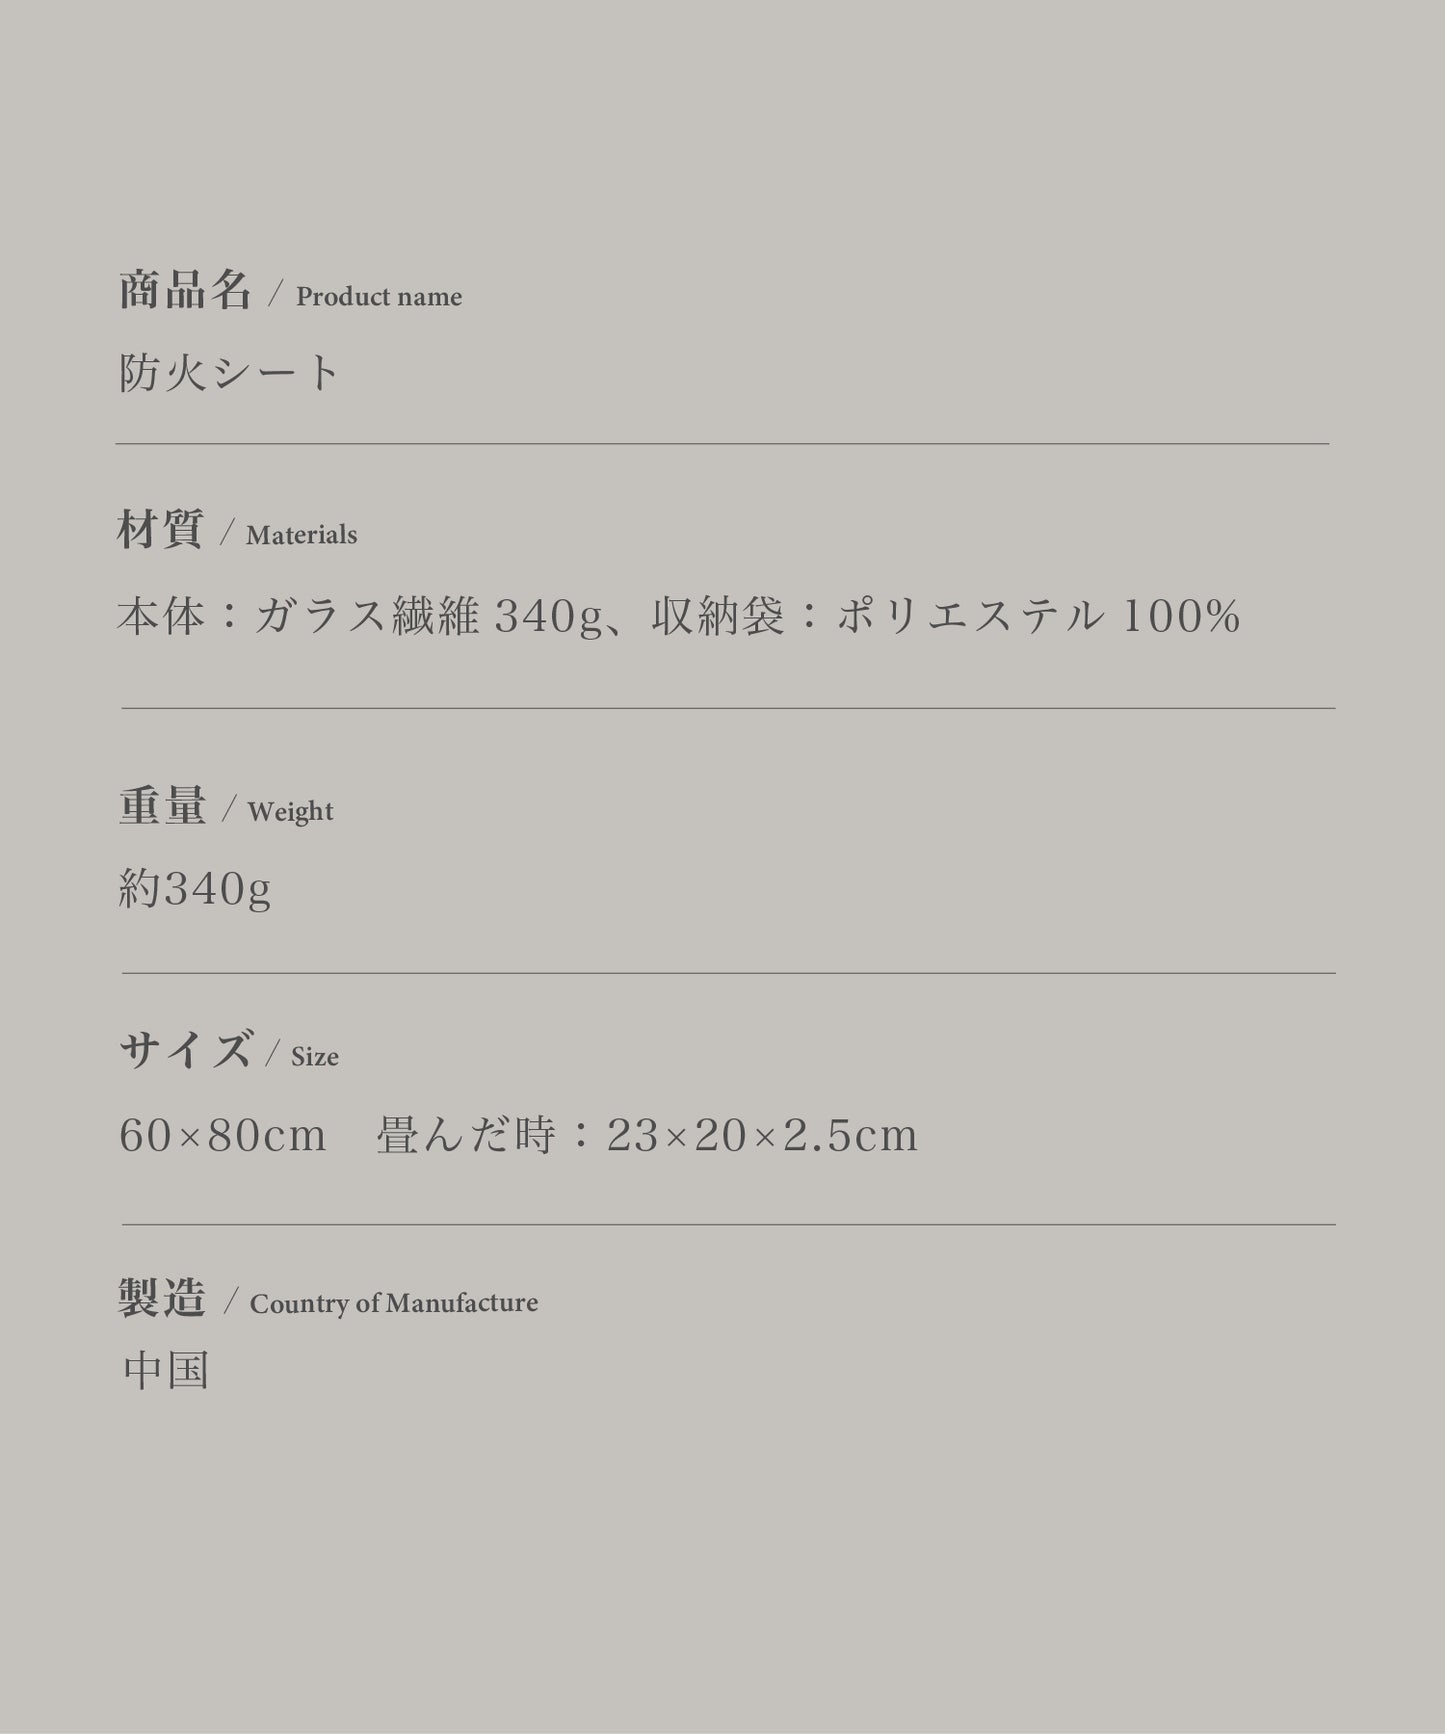 【S'more /Fire protection sheet 】防火シート